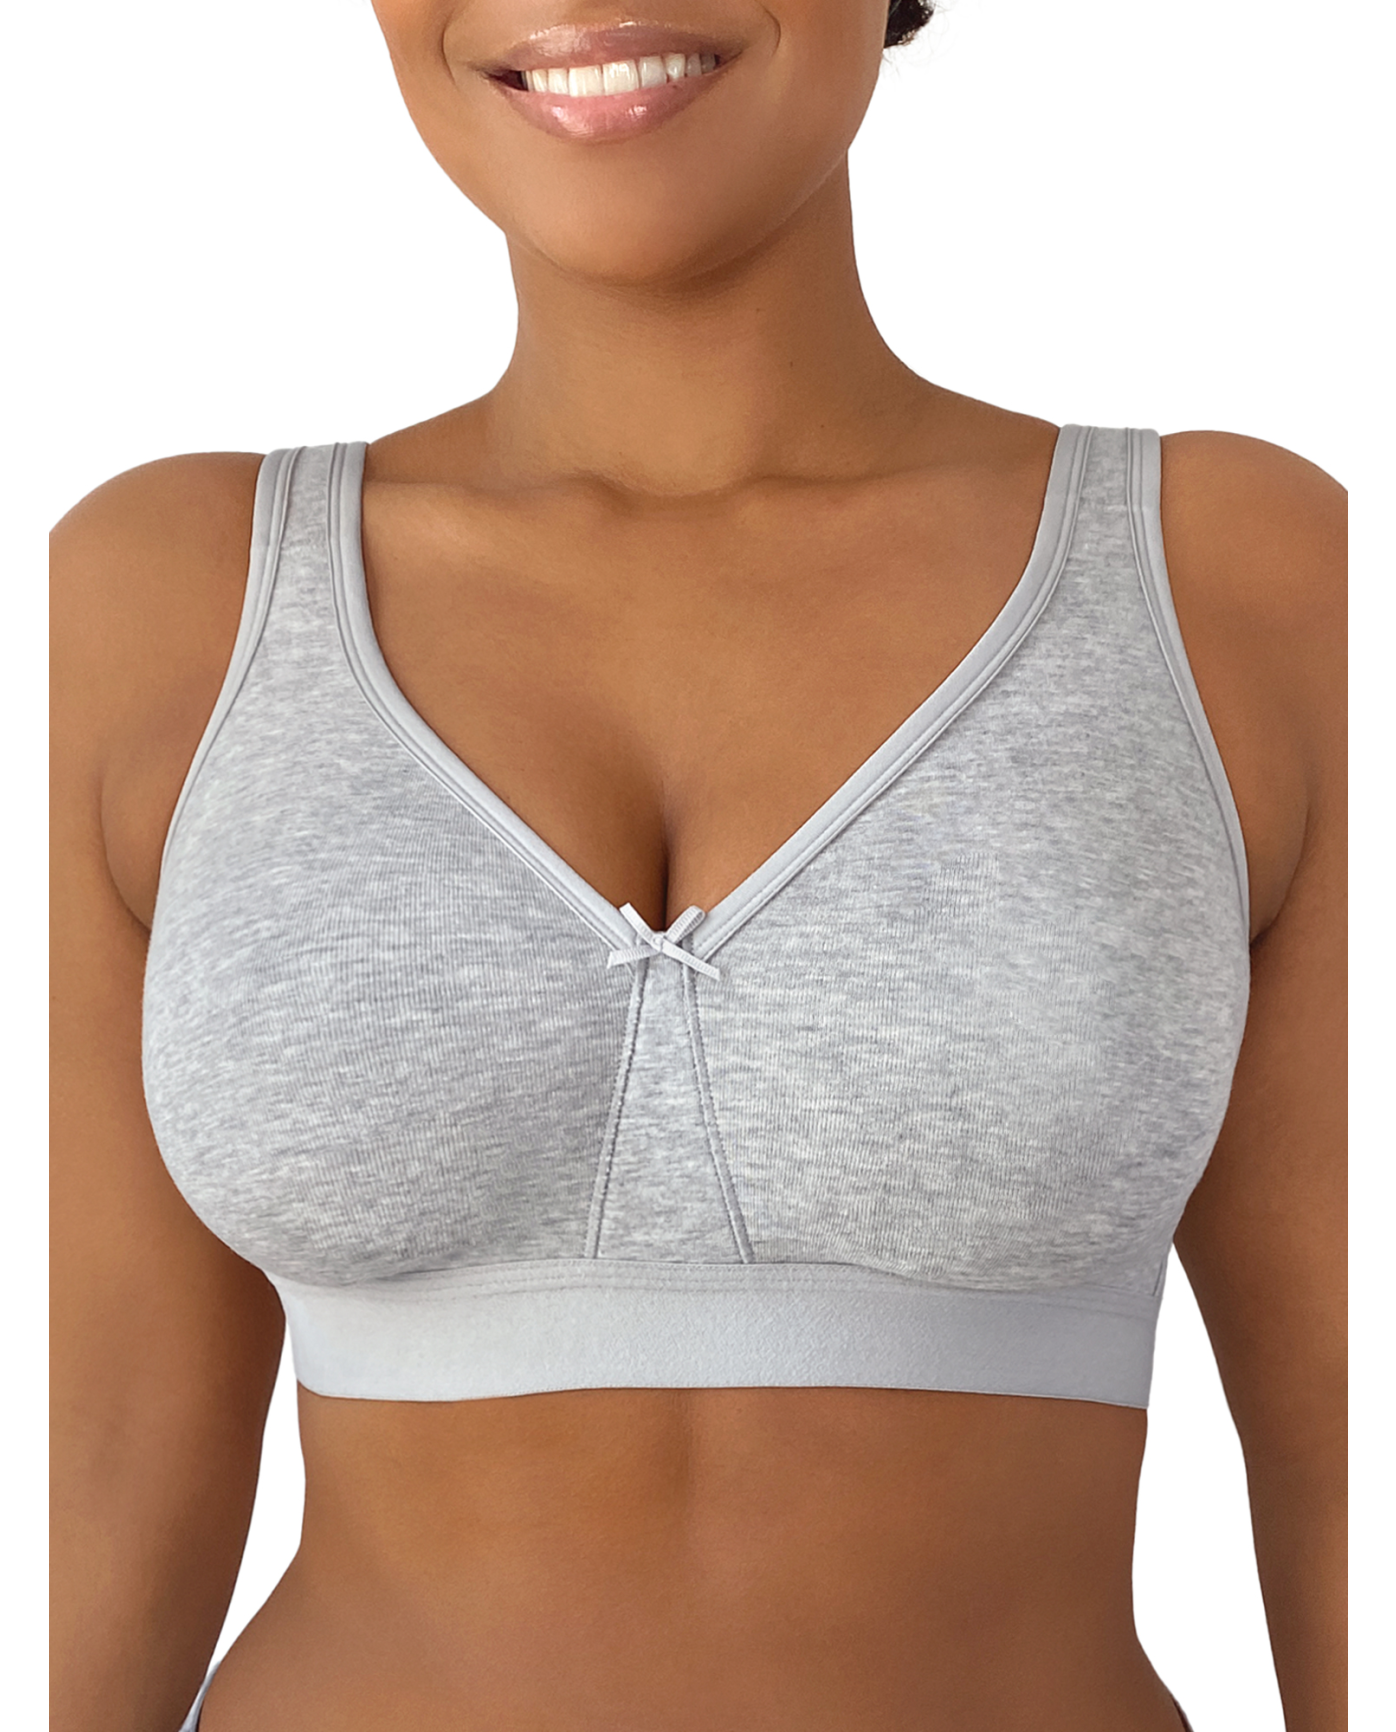 Cotton Bra: Breathable Comfort for Everyday Wear